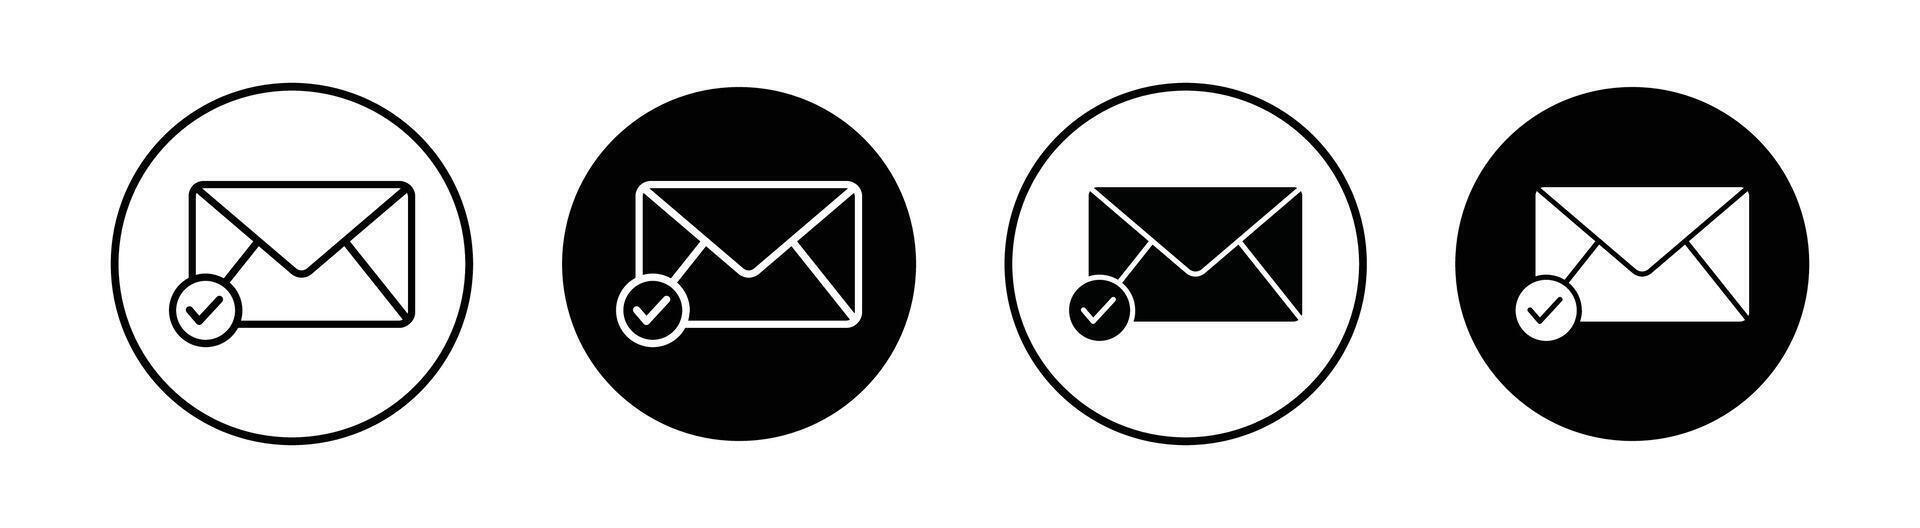 Approved message icon vector